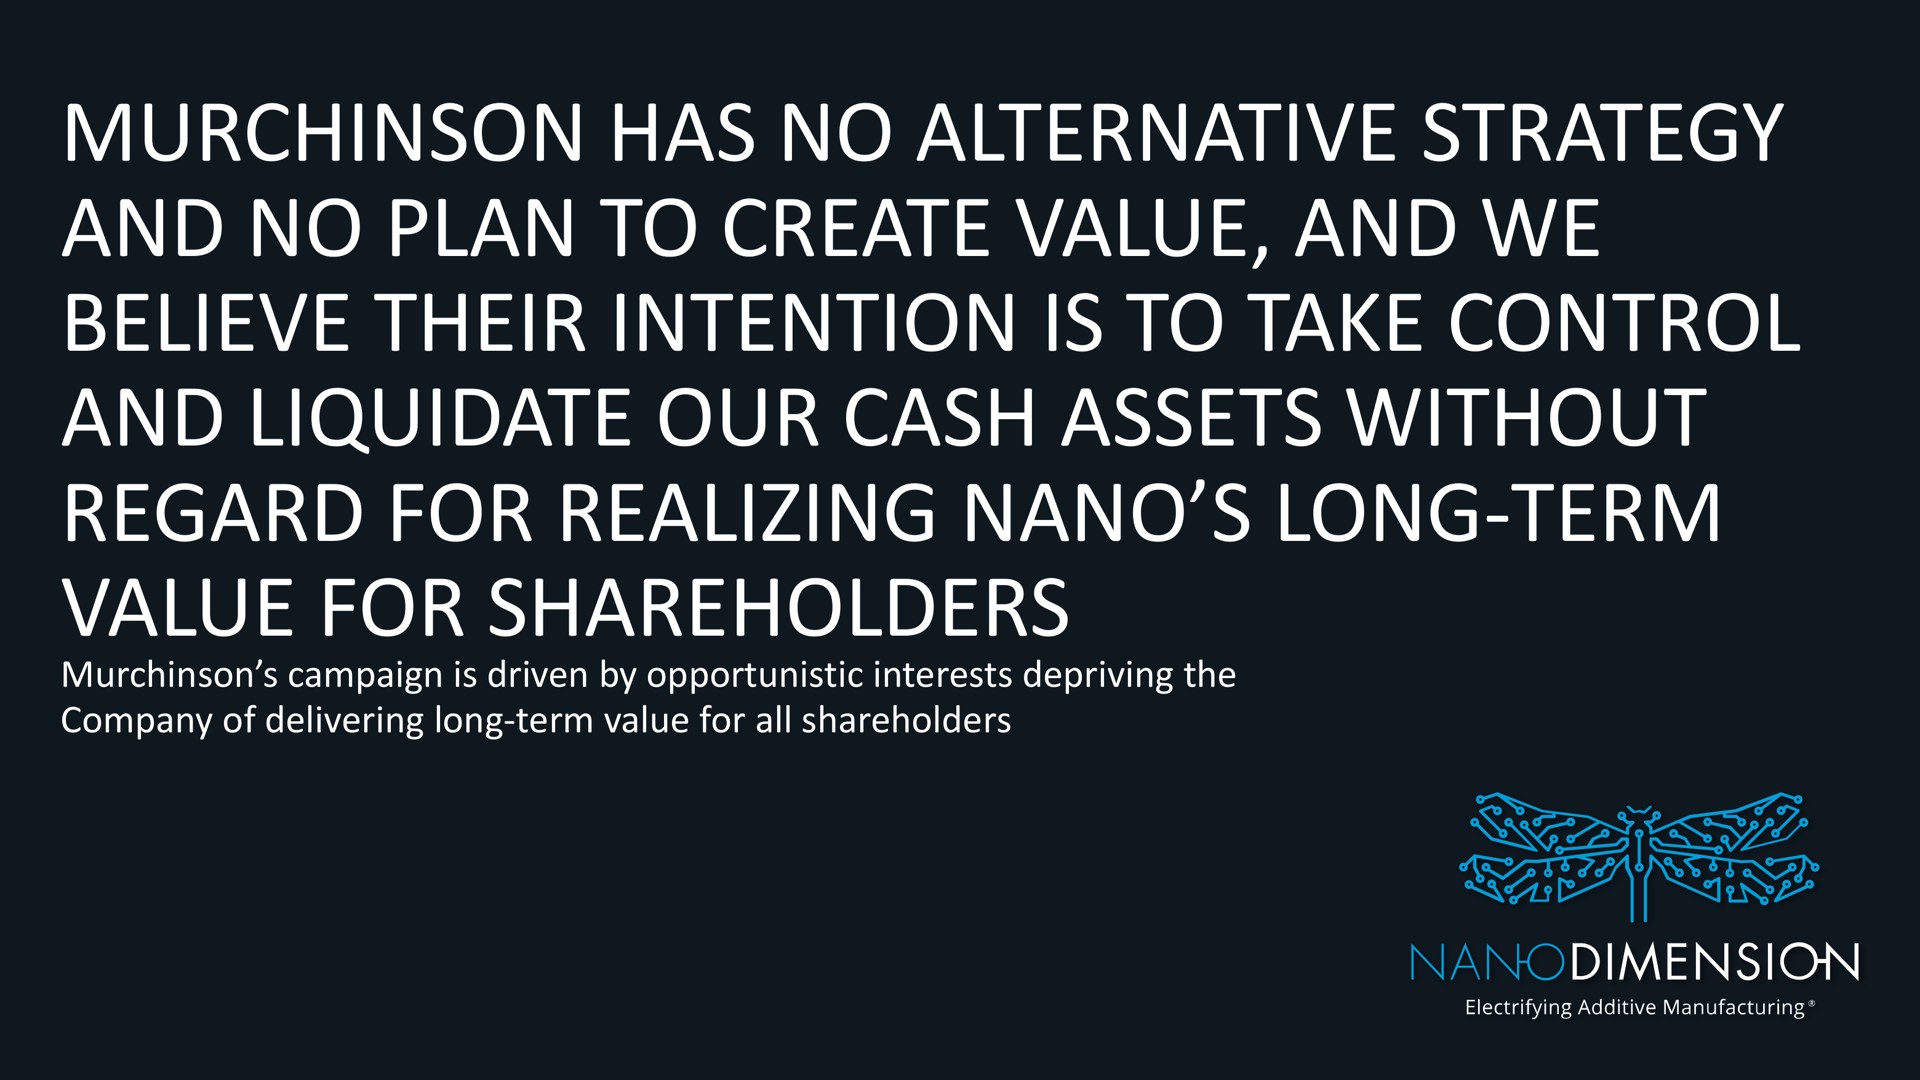 has no alternative strategy and no plan to create value and we believe their intention is to take control and liquidate our cash assets without regard for realizing long term value for shareholders | Nano Dimension